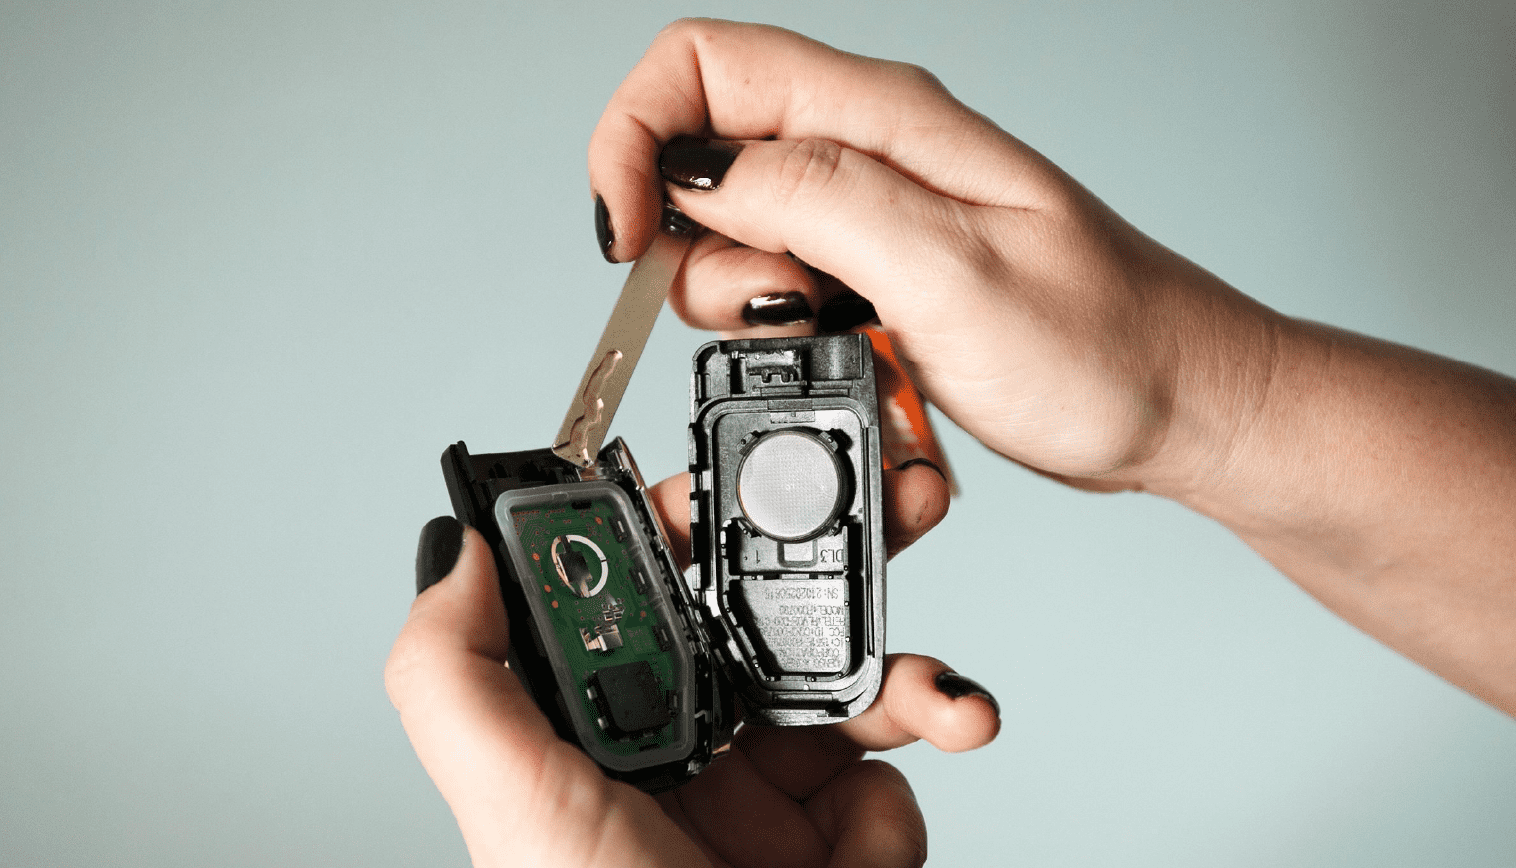 How to change a car key battery?|How to adjust a car headlight?